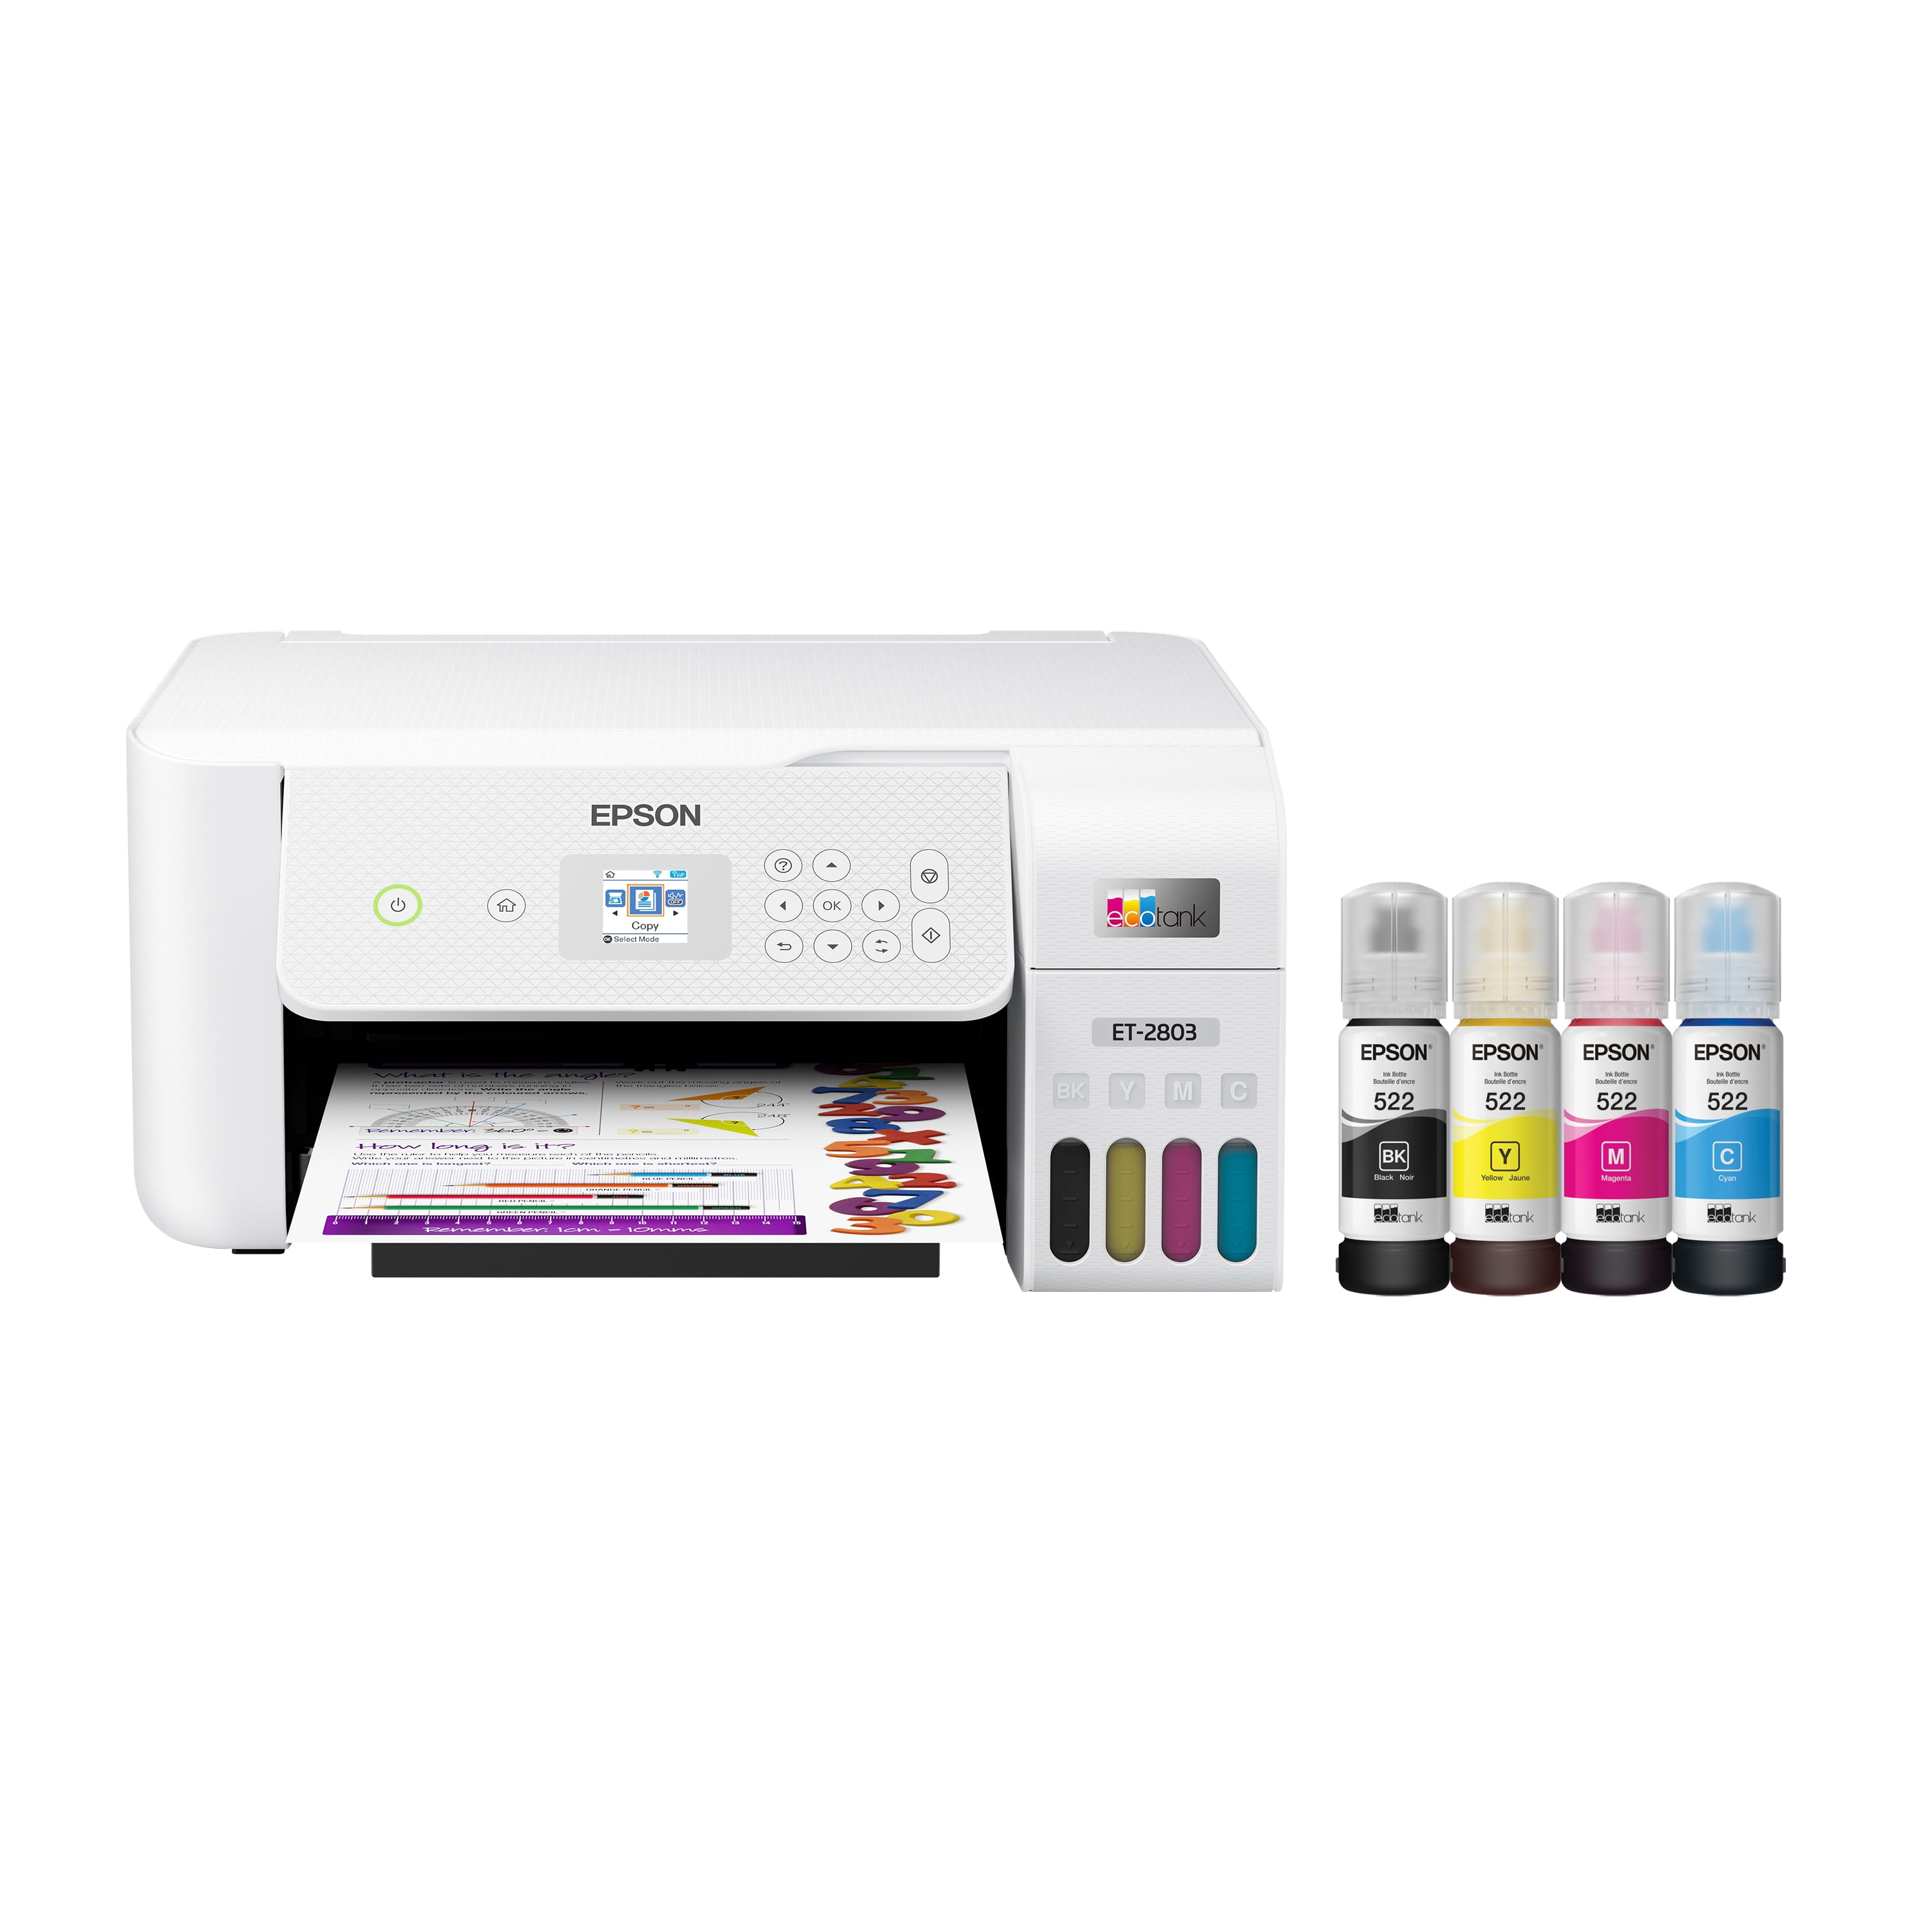  EPSON C11CD31201 Expression Premium XP-610 Wireless Color Photo  Printer with Scanner and Copier : Office Products